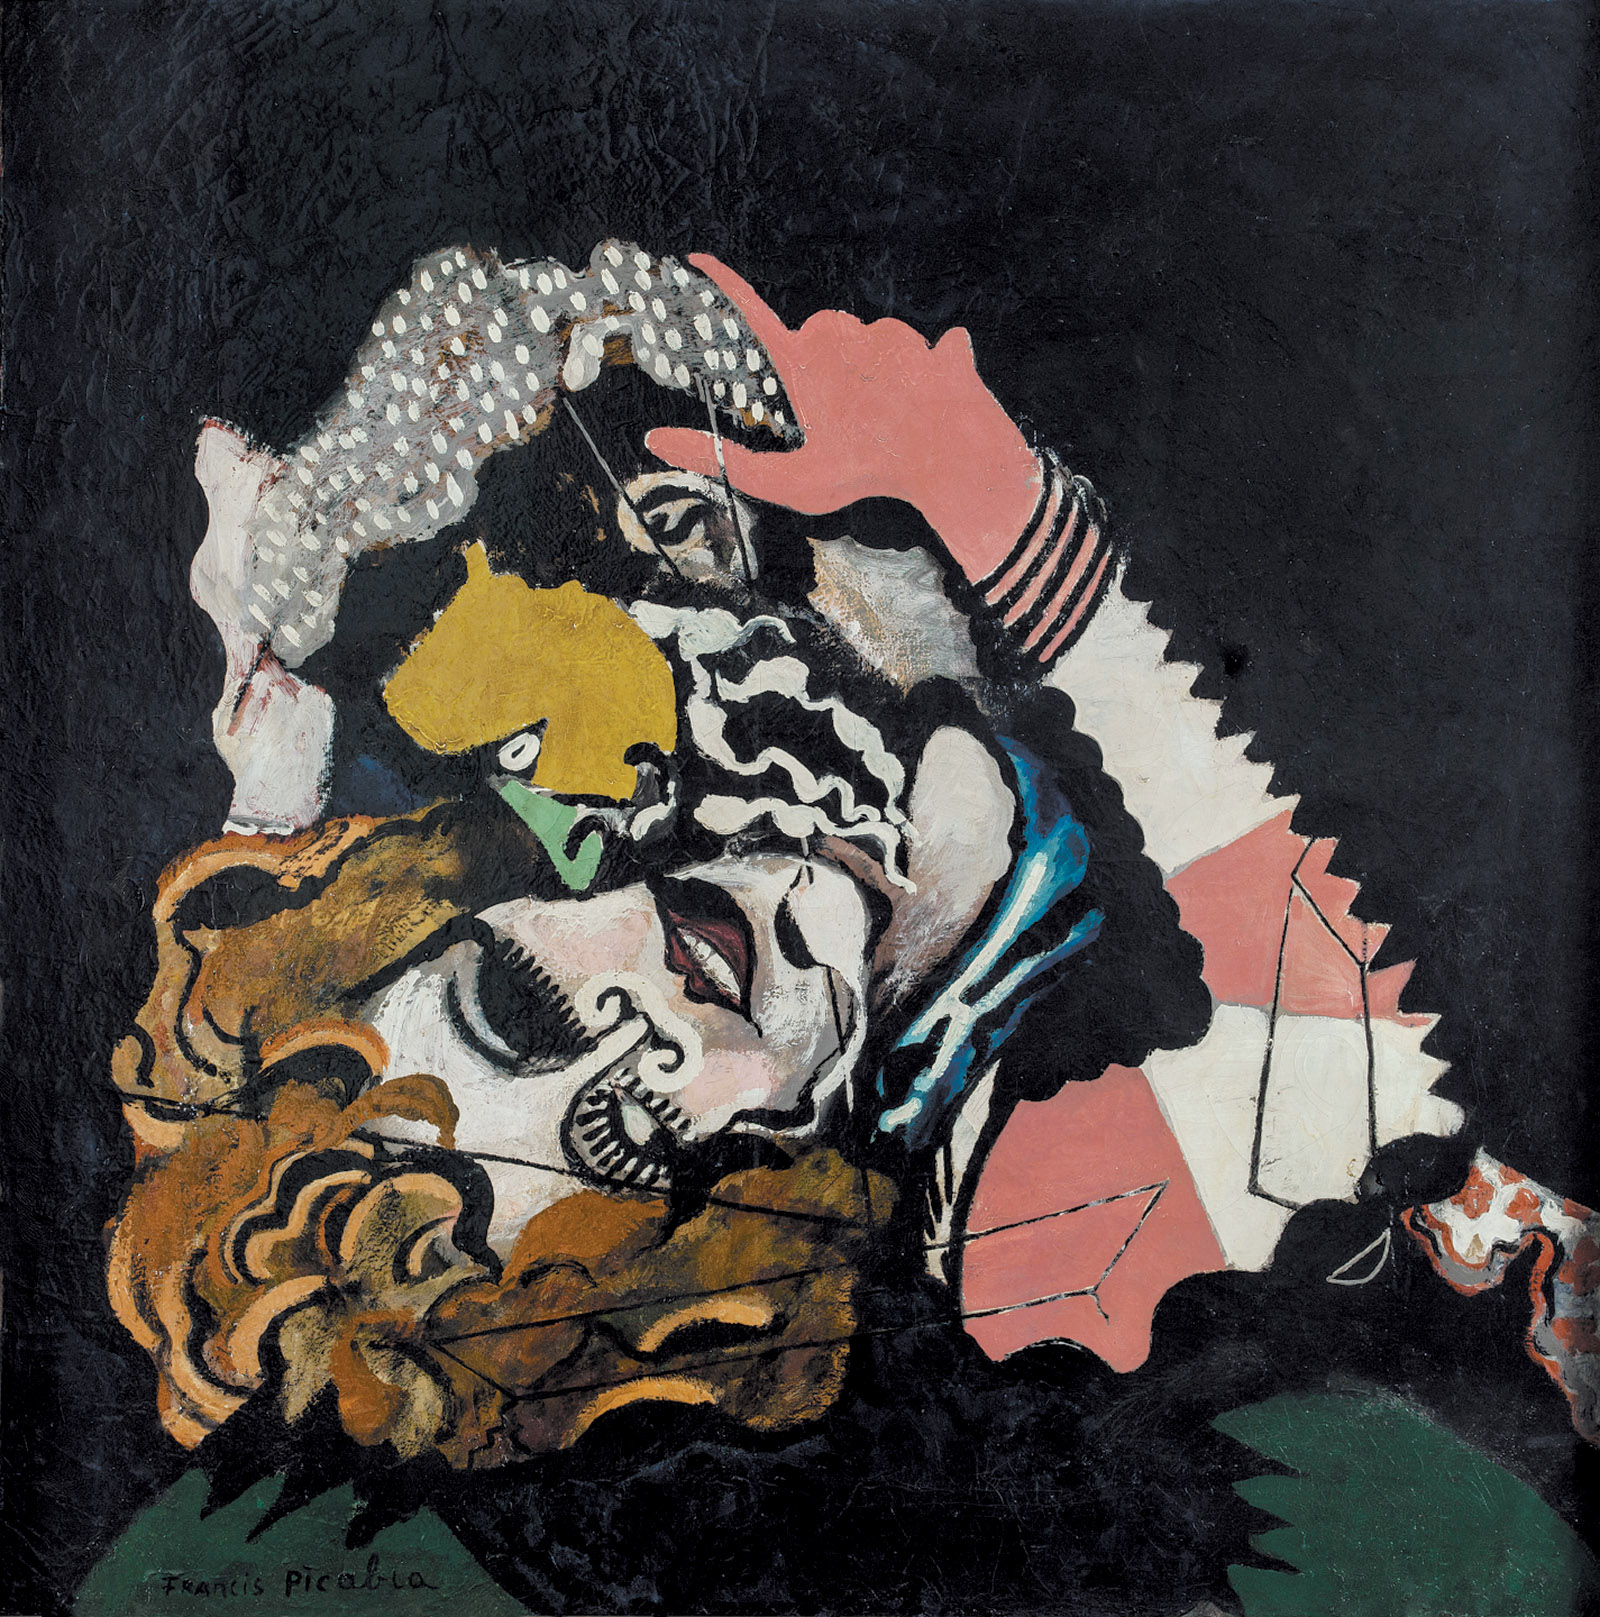 Francis Picabia: The Lovers (After the Rain), 1925 